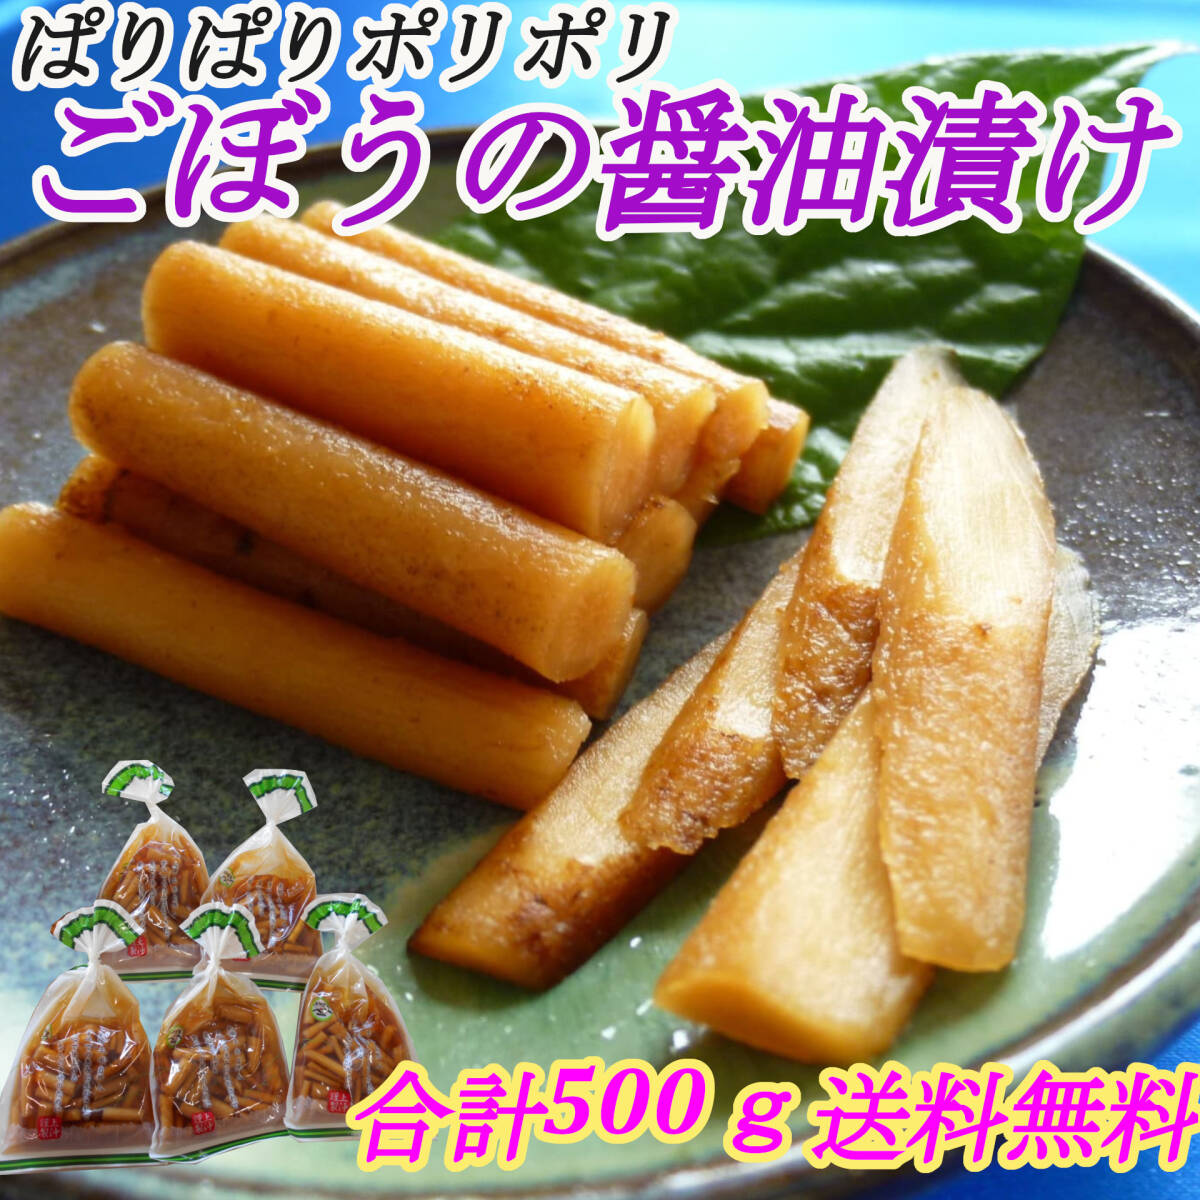  burdock. soy sauce .100g×5 sack rice. .. Miyazaki production burdock side dish snack tea .. color .. cooking. attaching join meal .. neat free shipping 